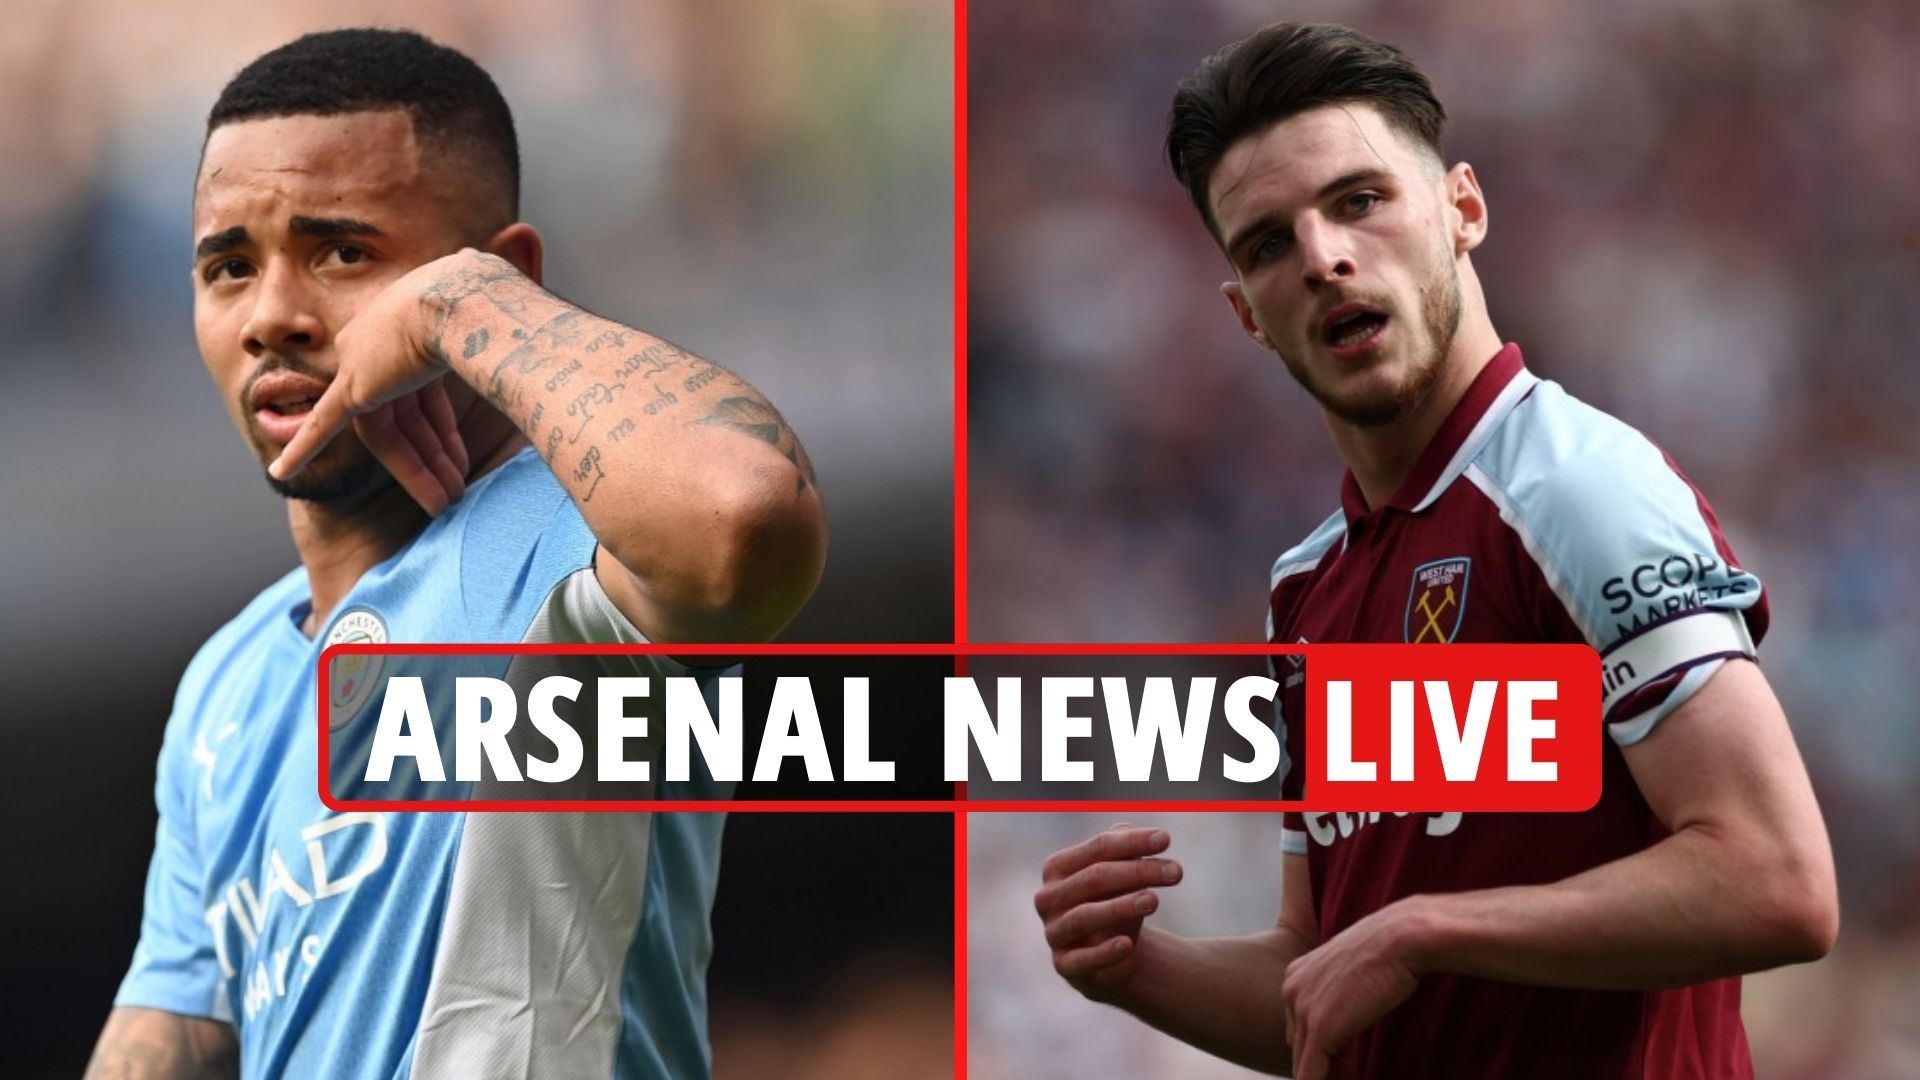 Arsenal news LIVE: latest gossip and transfer news from the Emirates